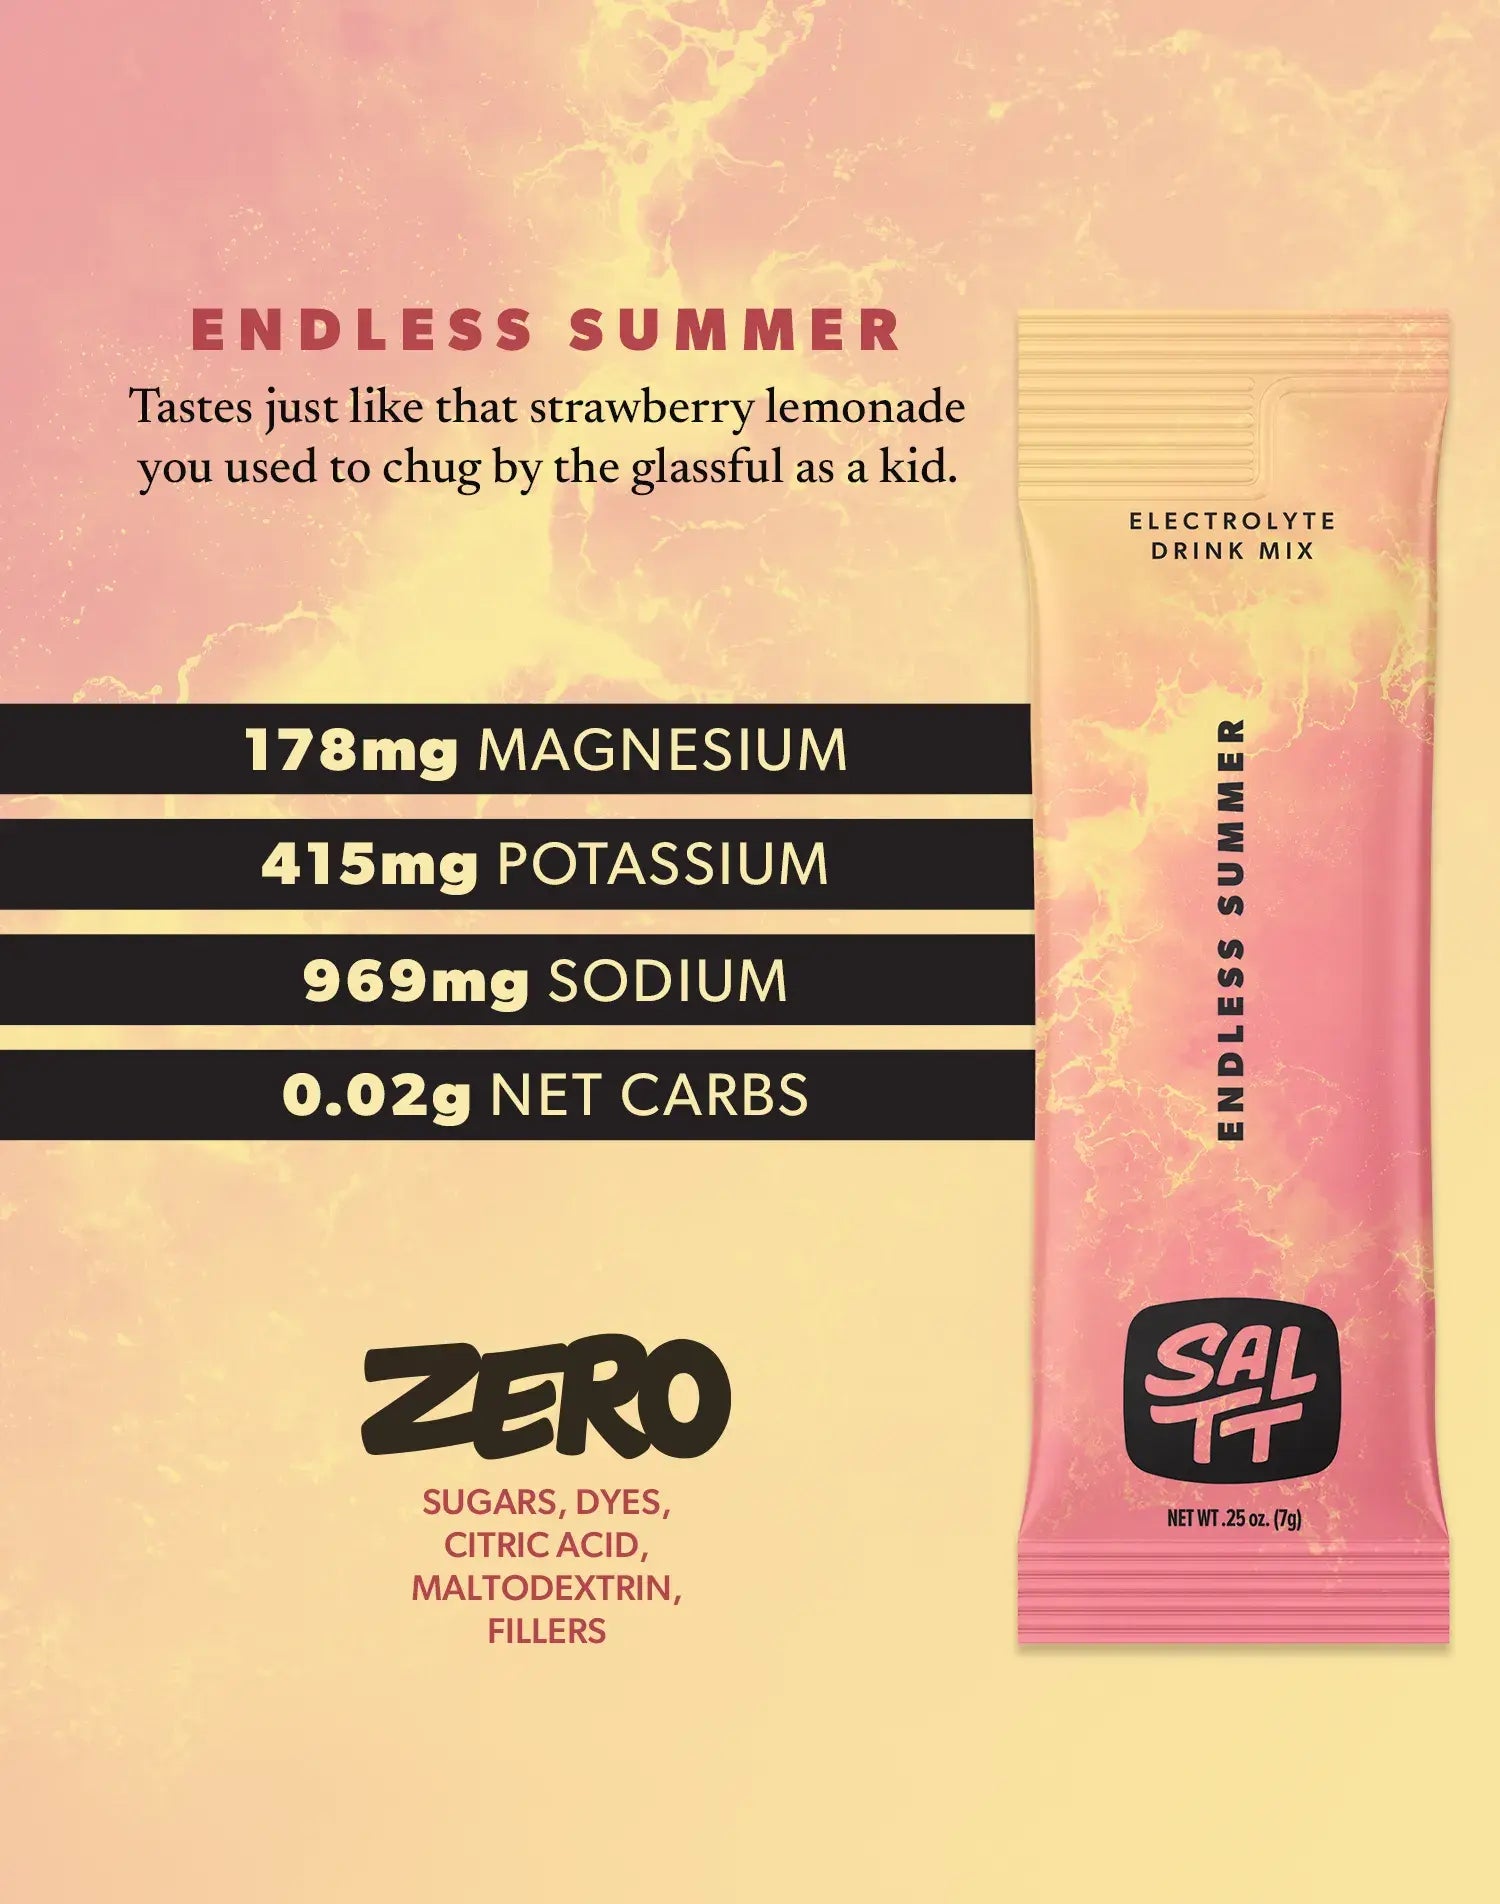 Nutrition for Endless Summer flavor. Endless Summer has 178mg Magnesium, 415mg Potassium, 969mg Sodium, 0.02g net carbs. Zero sugars, dyes, citric acid, maltodextrin, or fillers. See nutrition dropdown for complete supplement facts.